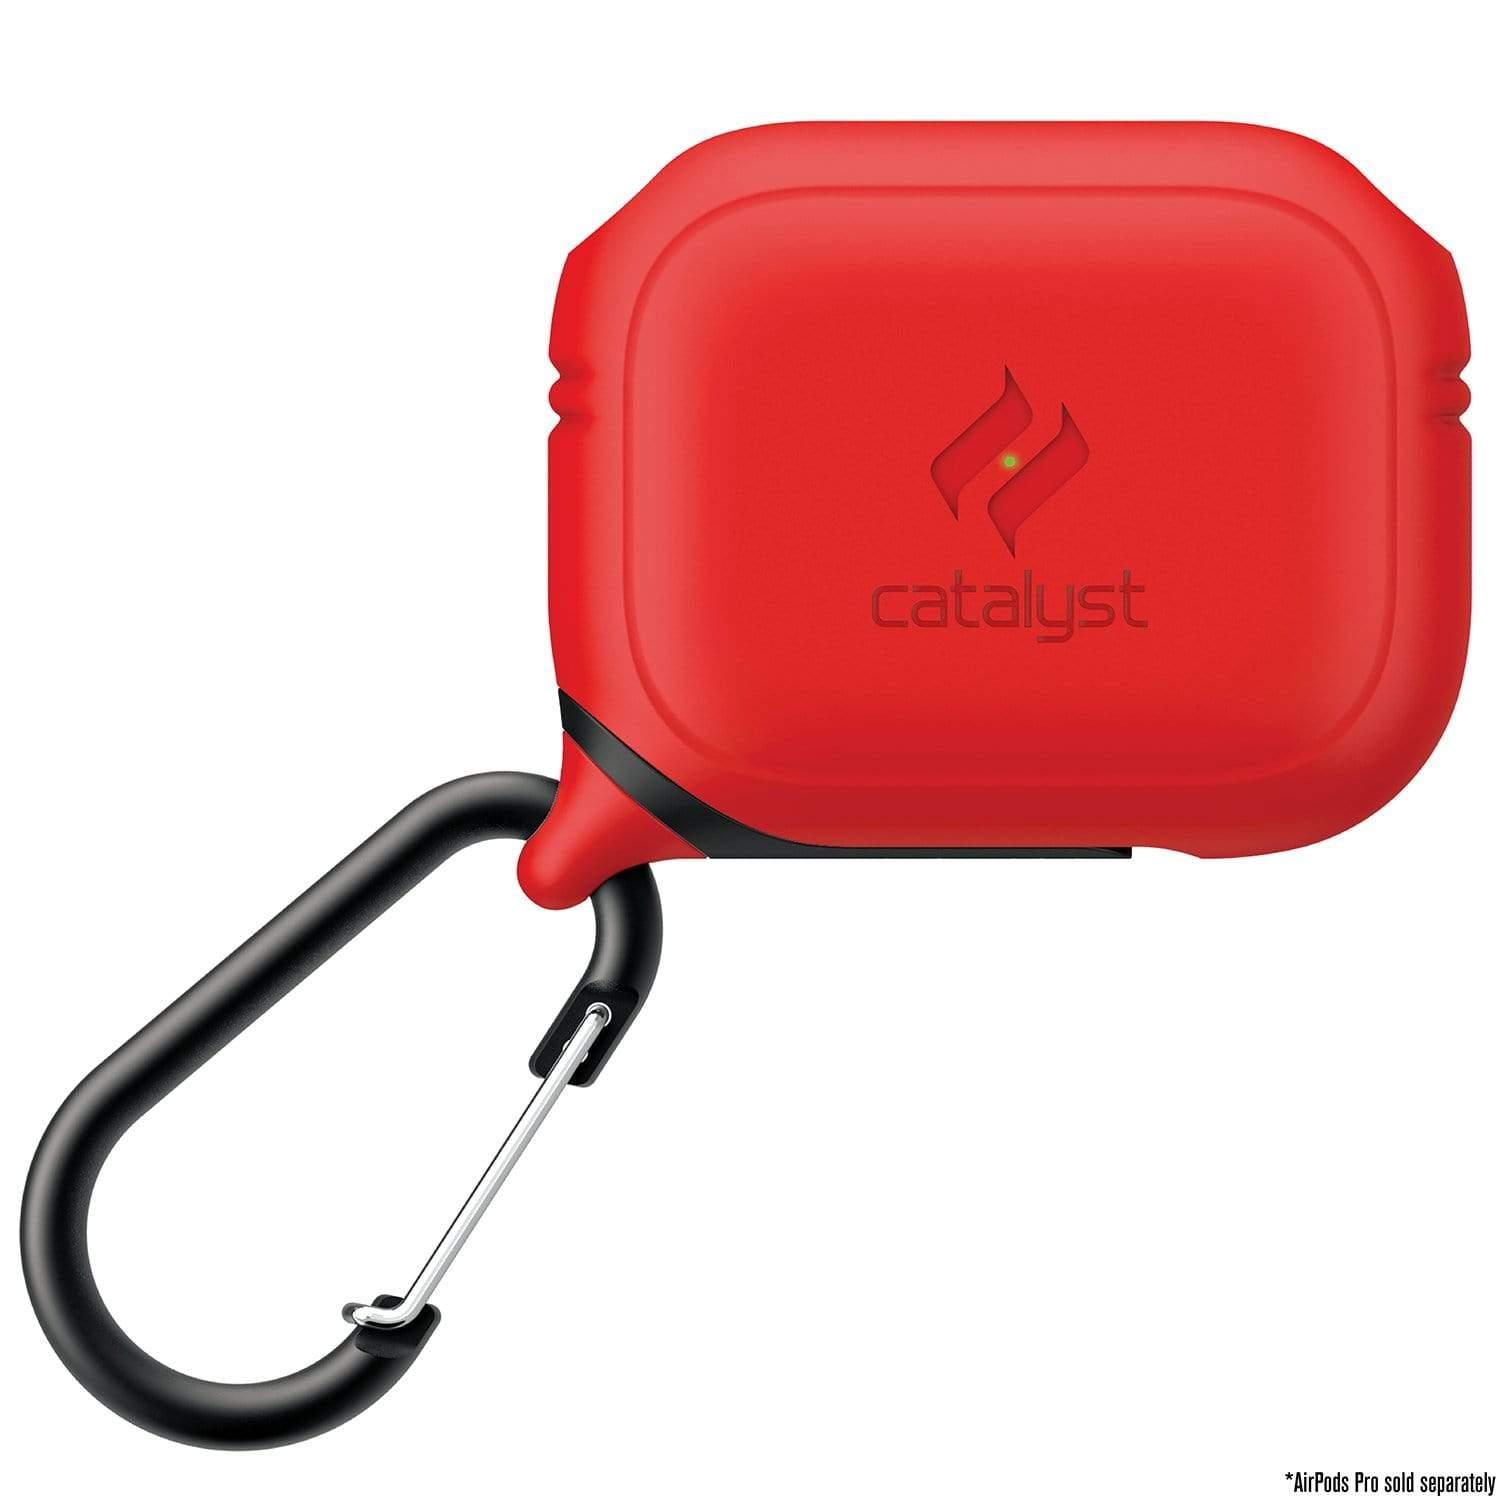 catalyst waterproof case for airpods pro flame red